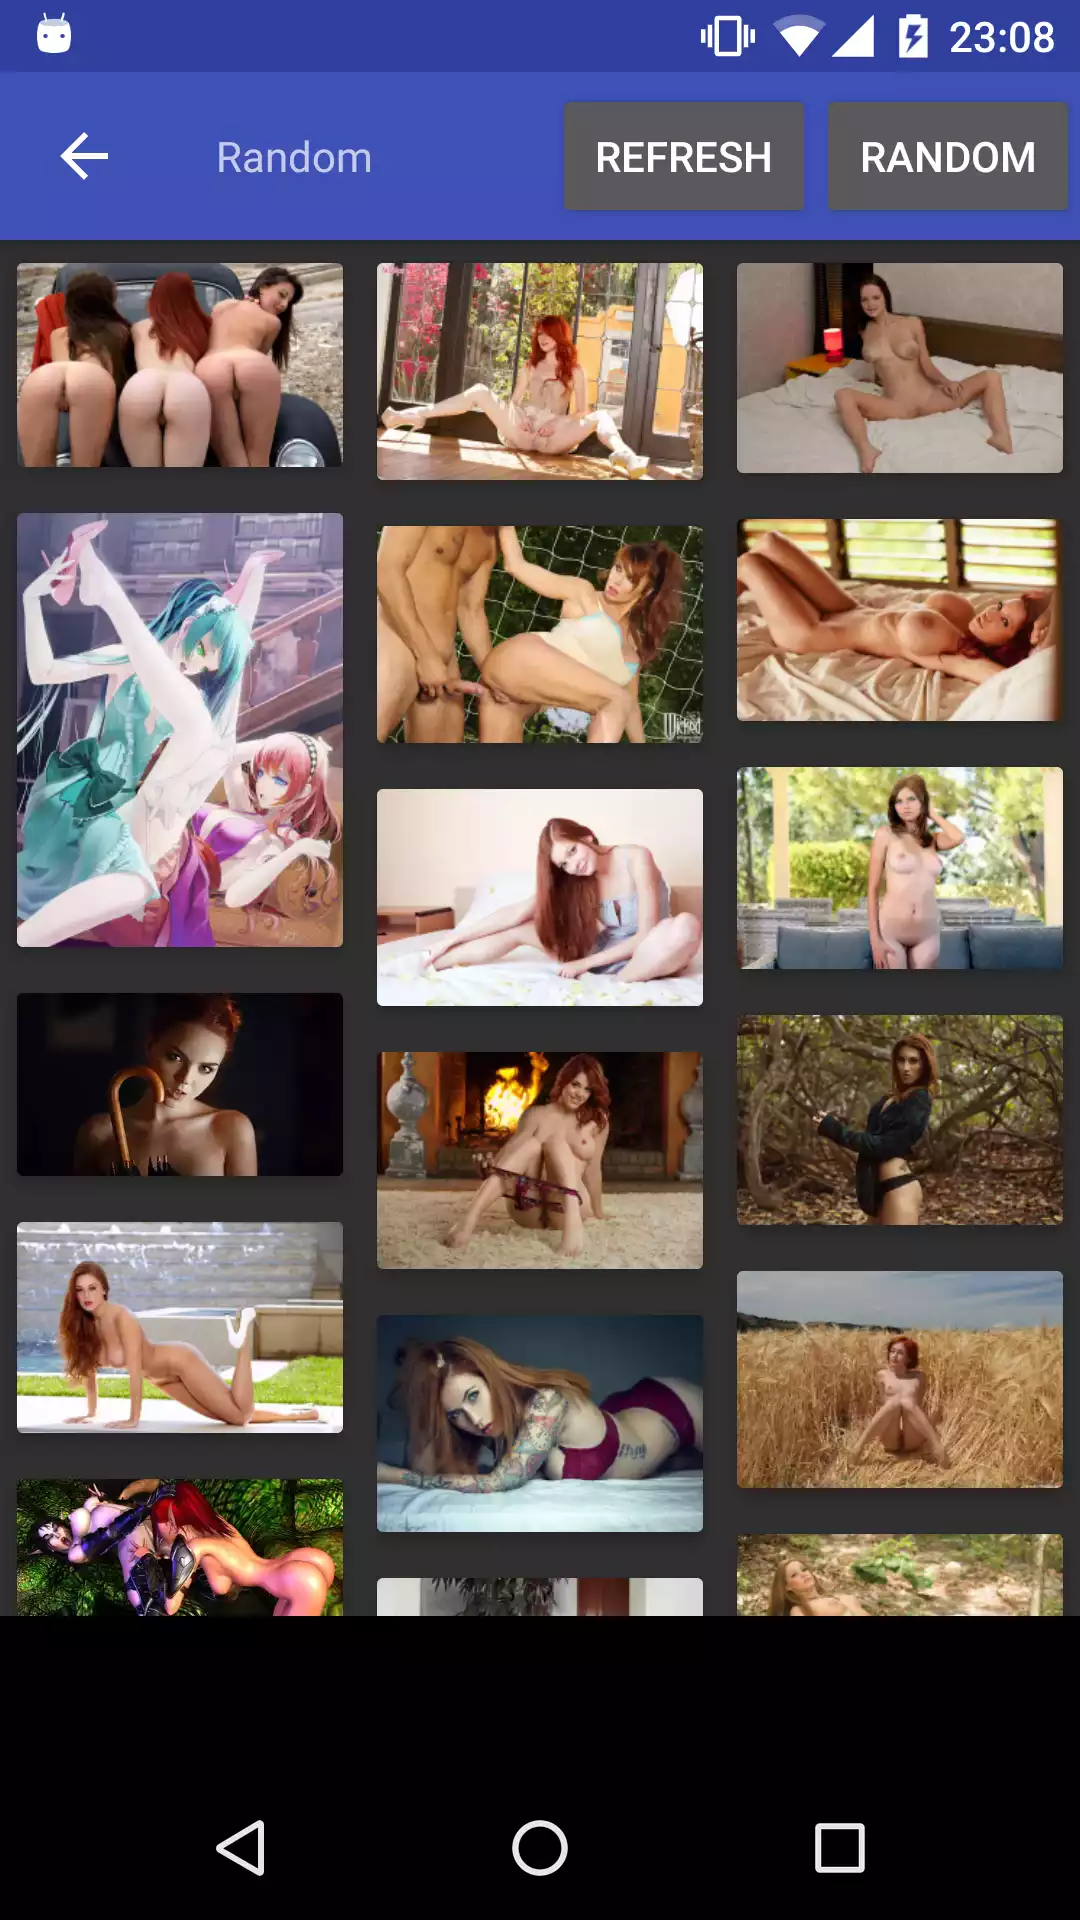 Sexy Redhead wallpapers apps,star,porn,downloads,anime,hot,photo,for,pornstars,galleries,saxy,application,wallpapers,amateur,pron,erotic,hentaimanga,backgrounds,sexy,pornstar,best,app,apk,gallery,pic,caprice,editor,redhead,stars